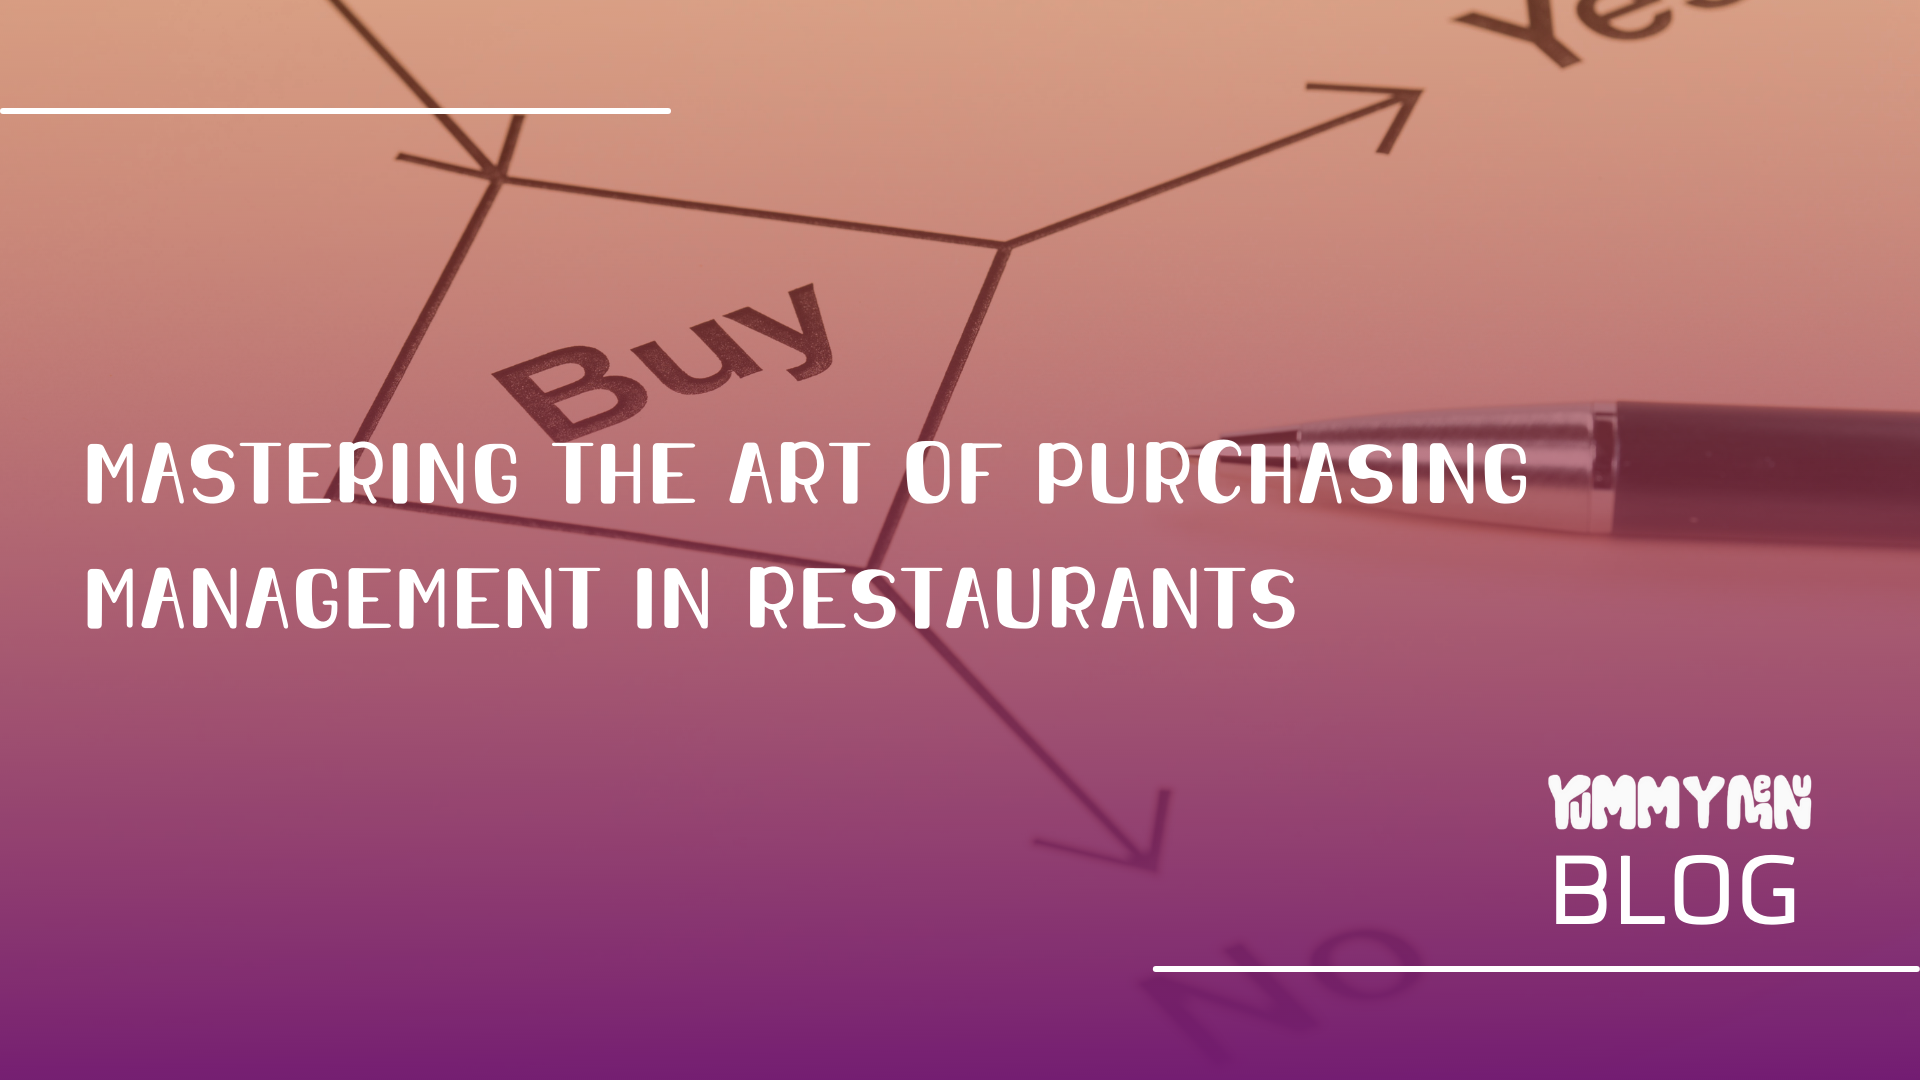 Mastering the Art of Purchasing Management in Restaurants